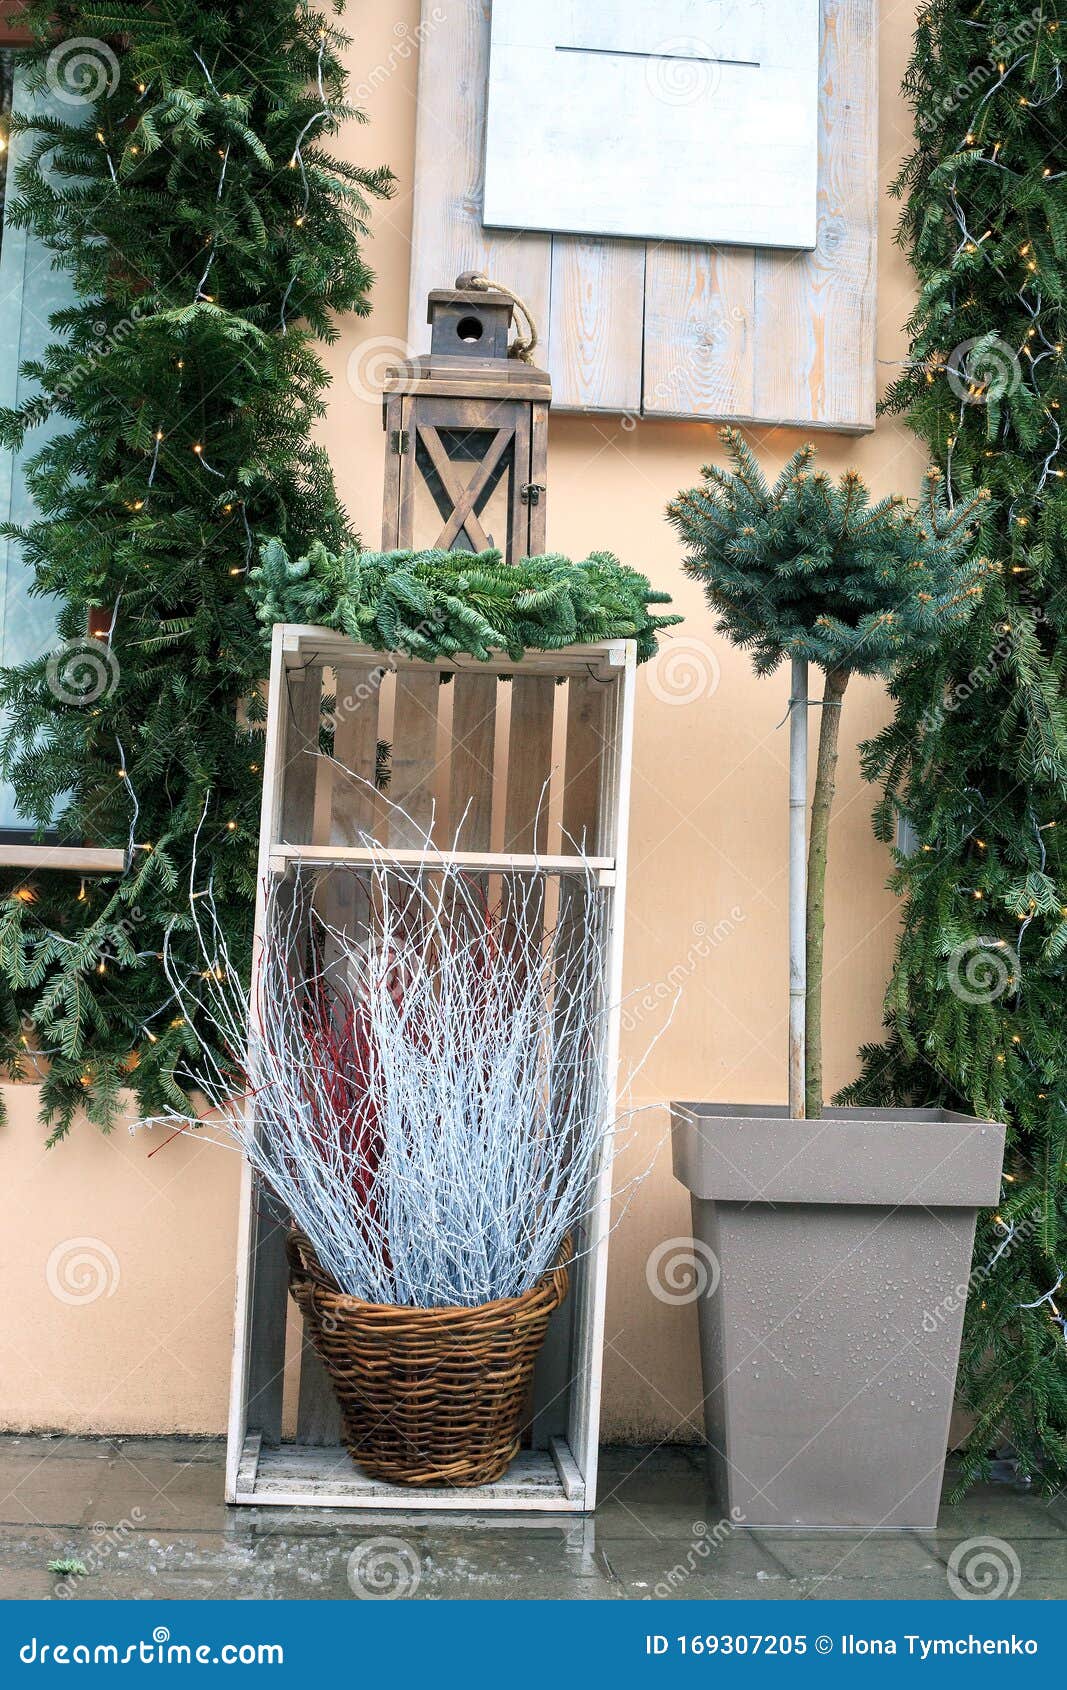 Dry Branches In Basket, Potted Christmas Tree And Lantern. Holidays Decor Near House Stock Image ...